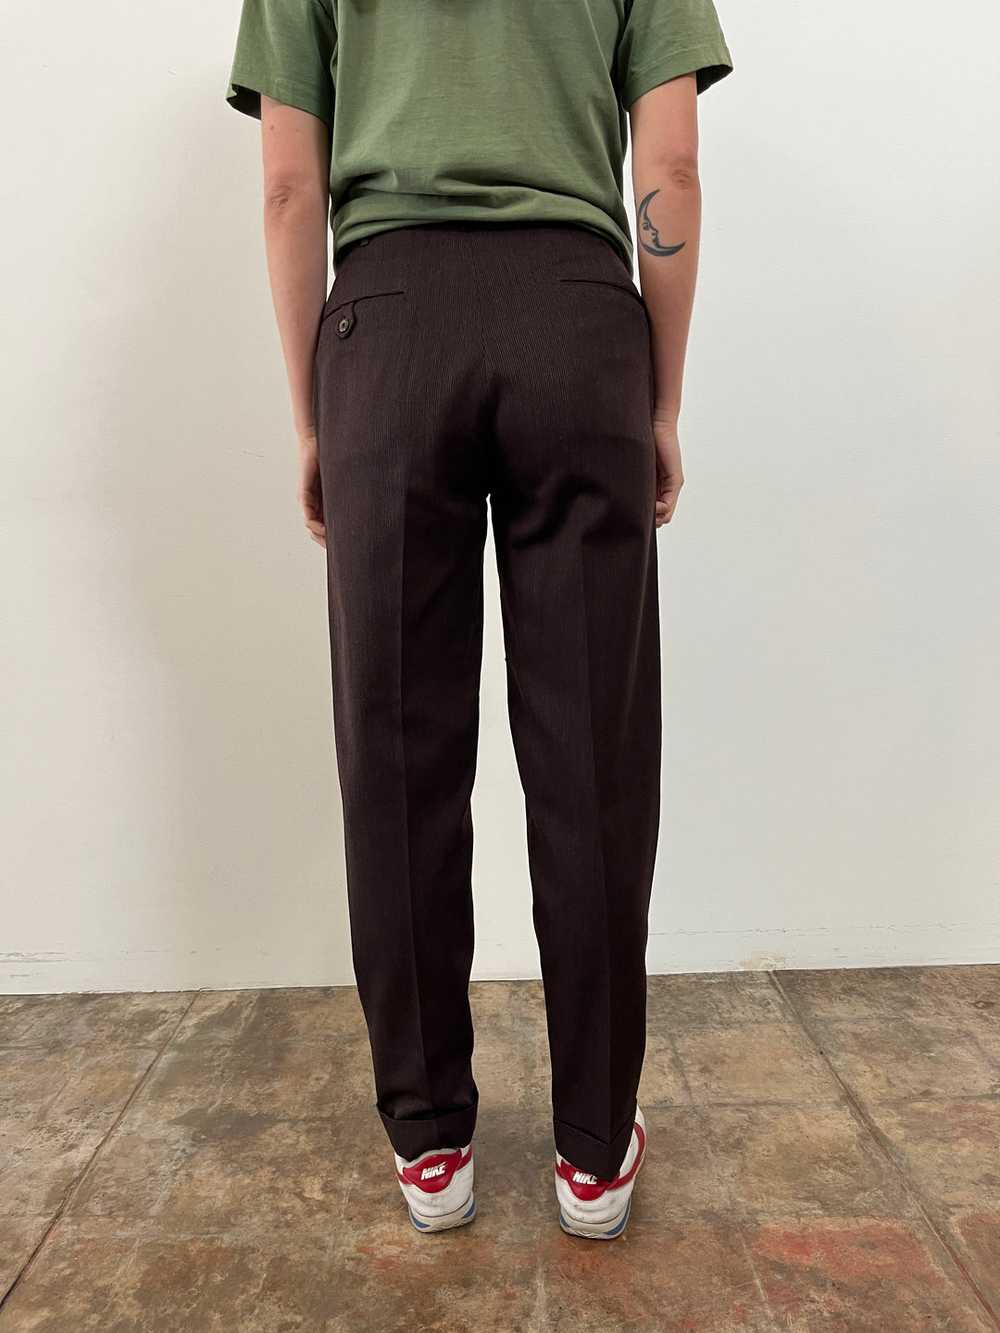 50s/60s Brown Twill Work Pants - image 4